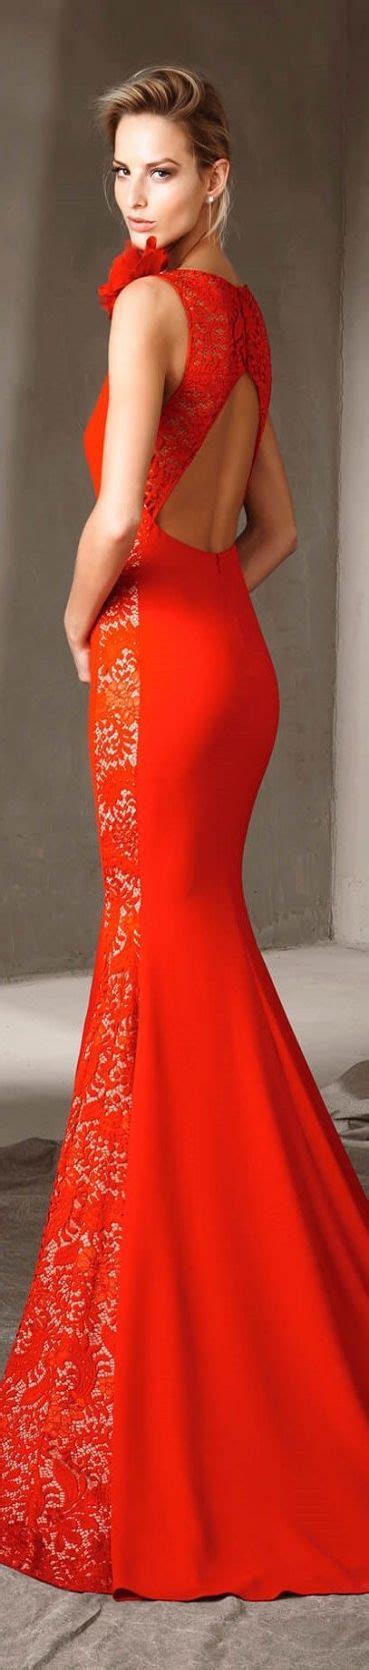 trendy fashion photography red dress gowns ideas red dress fall